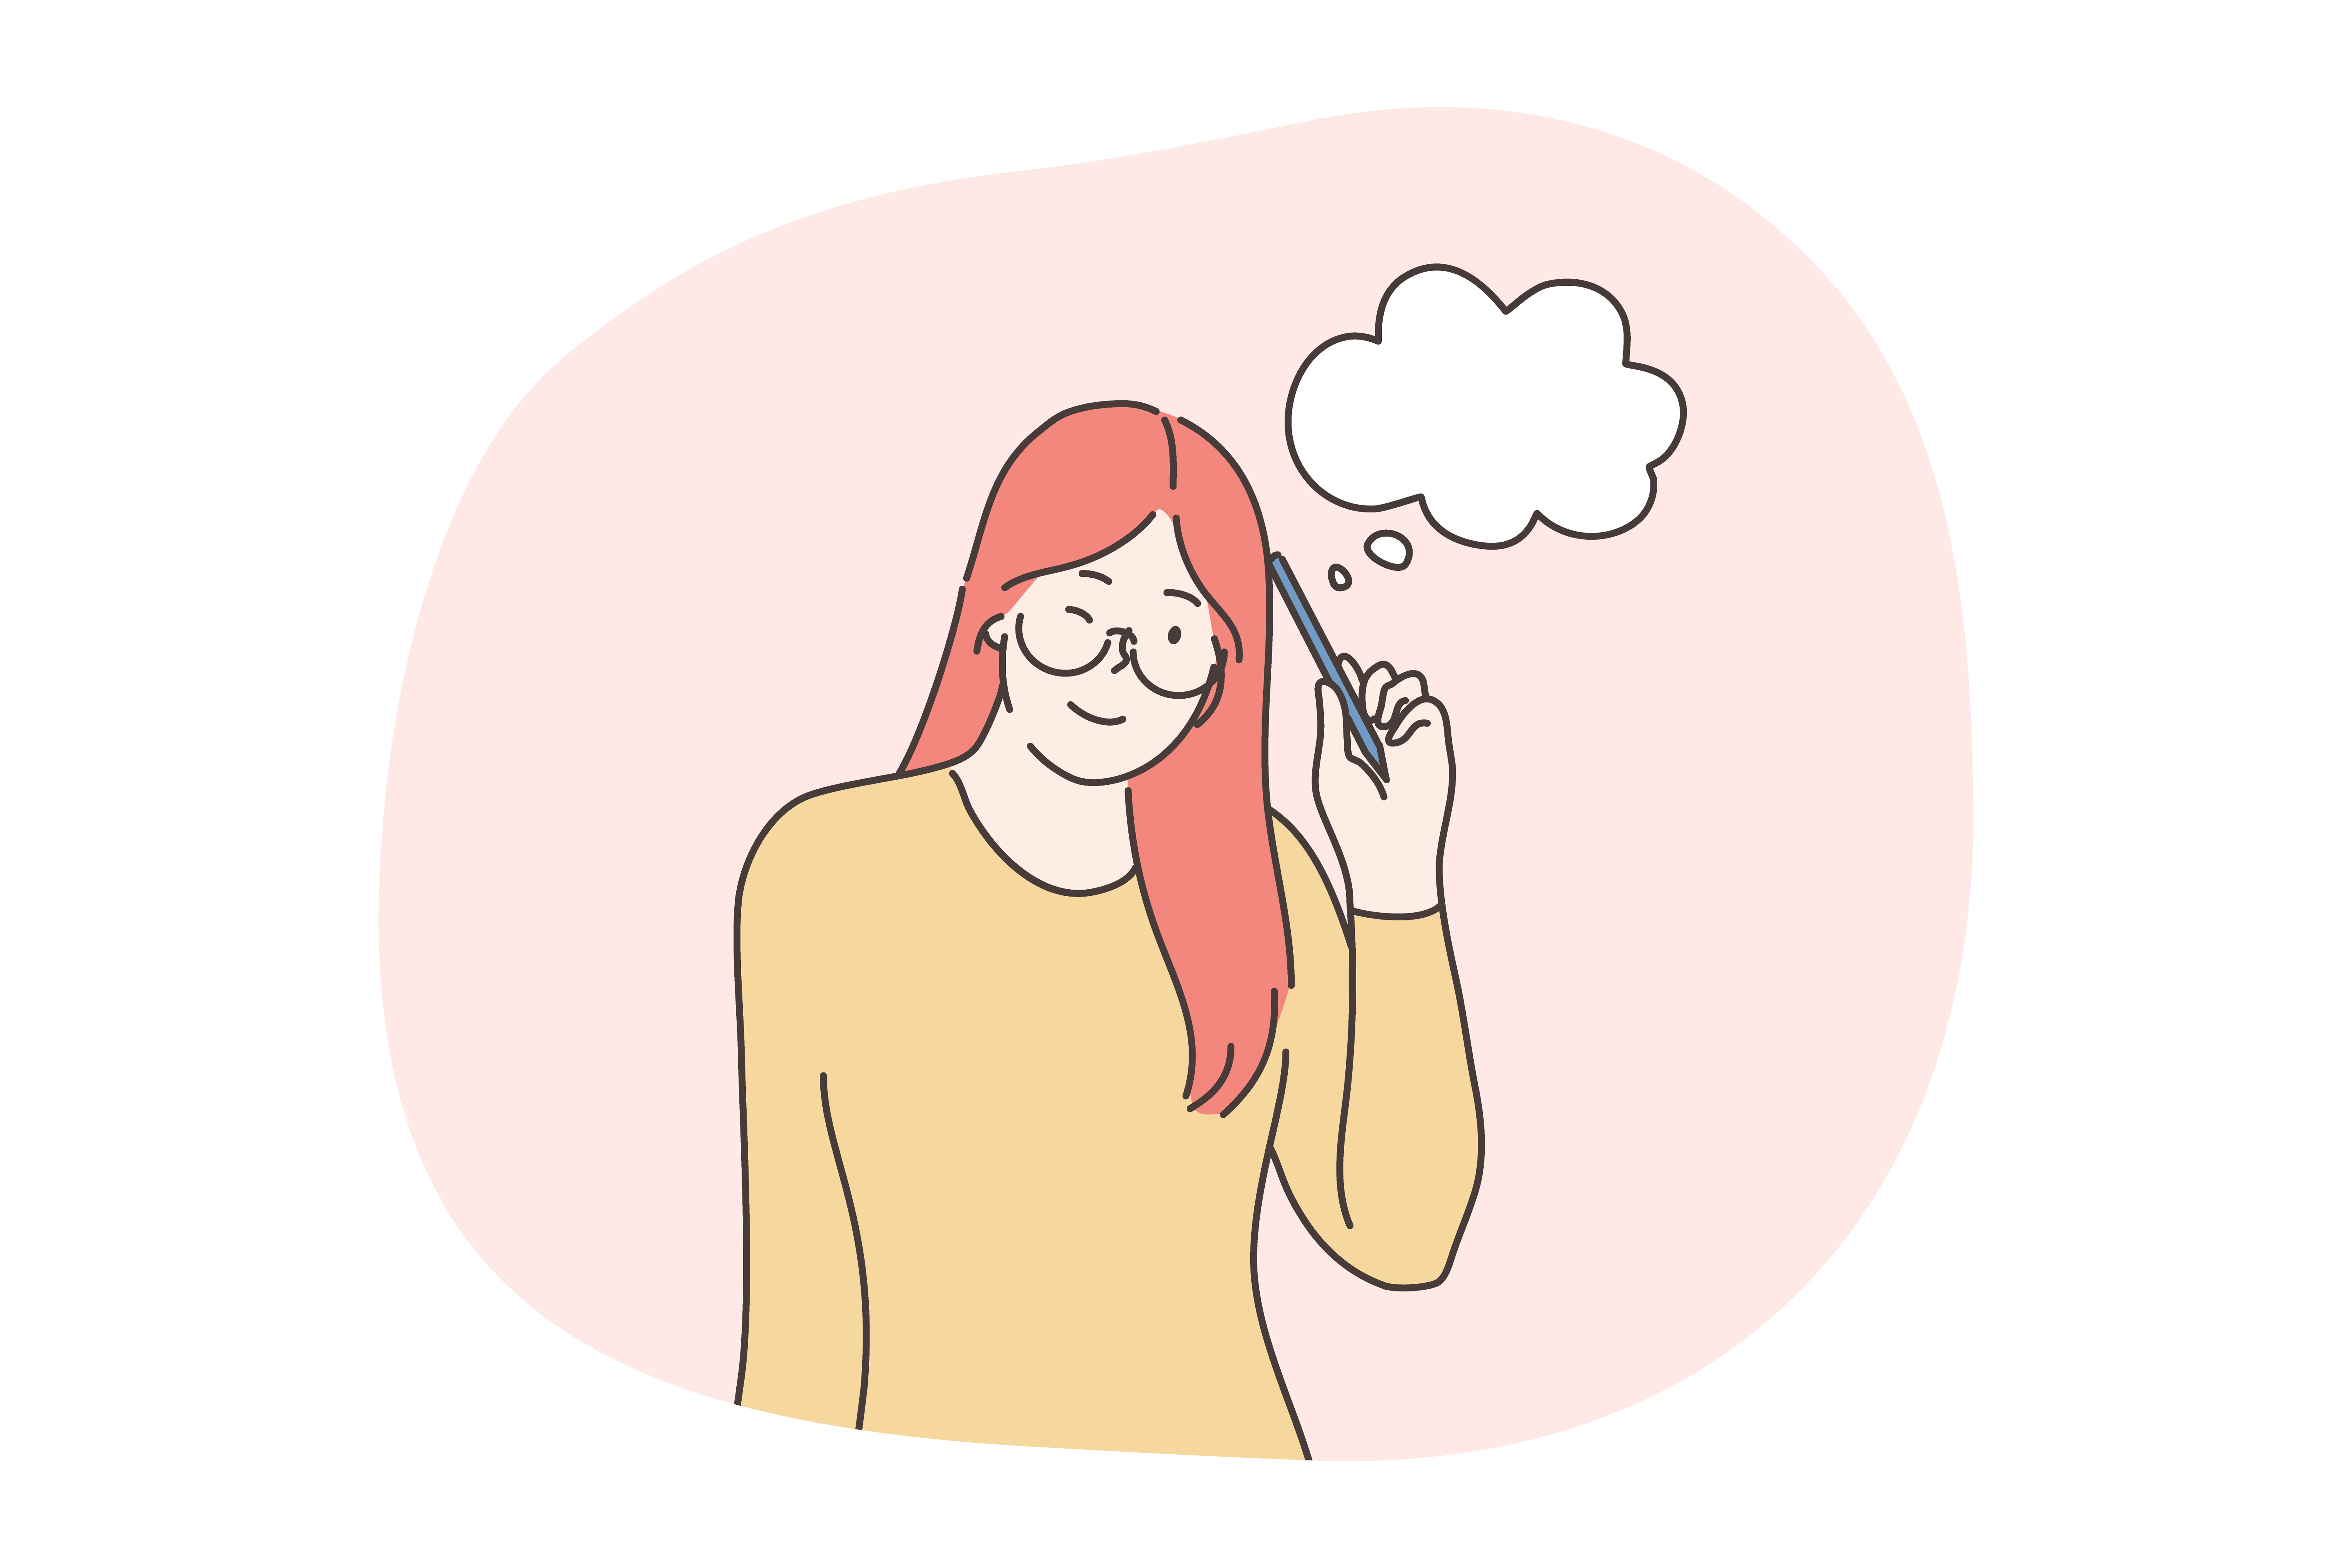 Thinking, having idea, doubt, brainstorm concept. Young red haired positive girl teen student cartoon character standing and thinking with pencil leaning on head with white cloud thoughts sign . Thinking, having idea, doubt, brainstorm concept